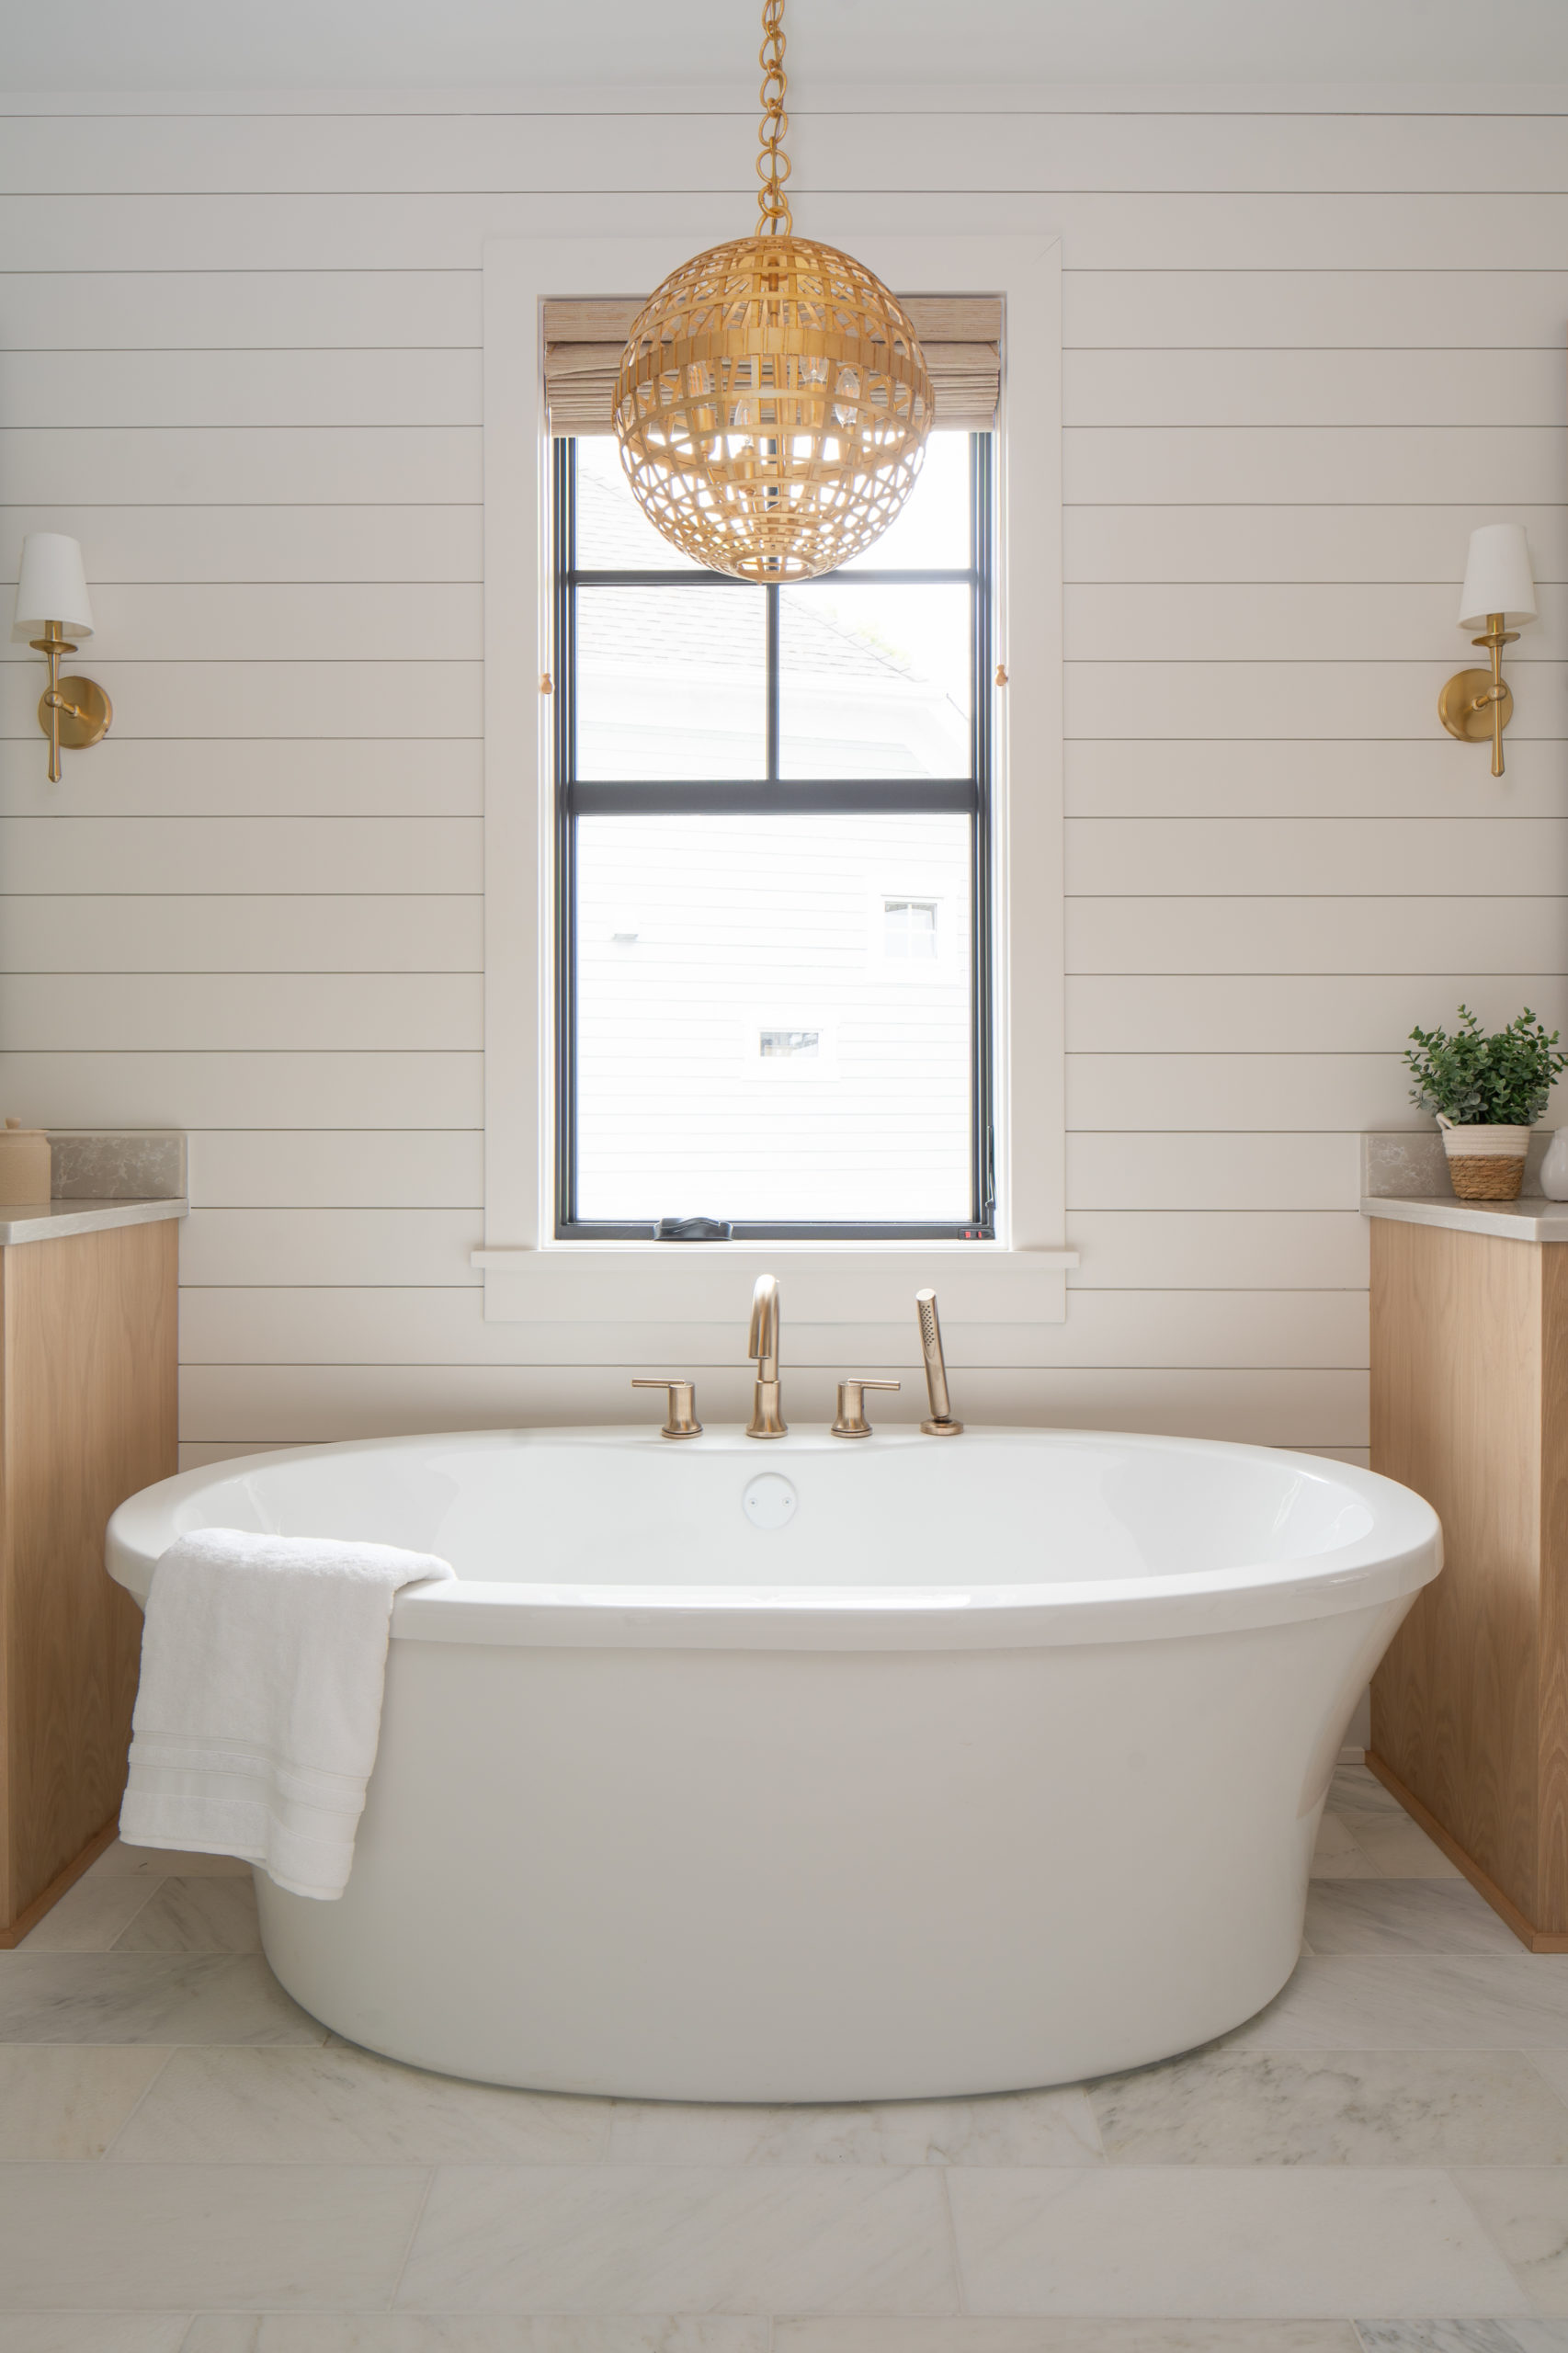 The Lake Escape custom home remodel features a luxurious white bathroom with a large tub and a mesmerizing chandelier.